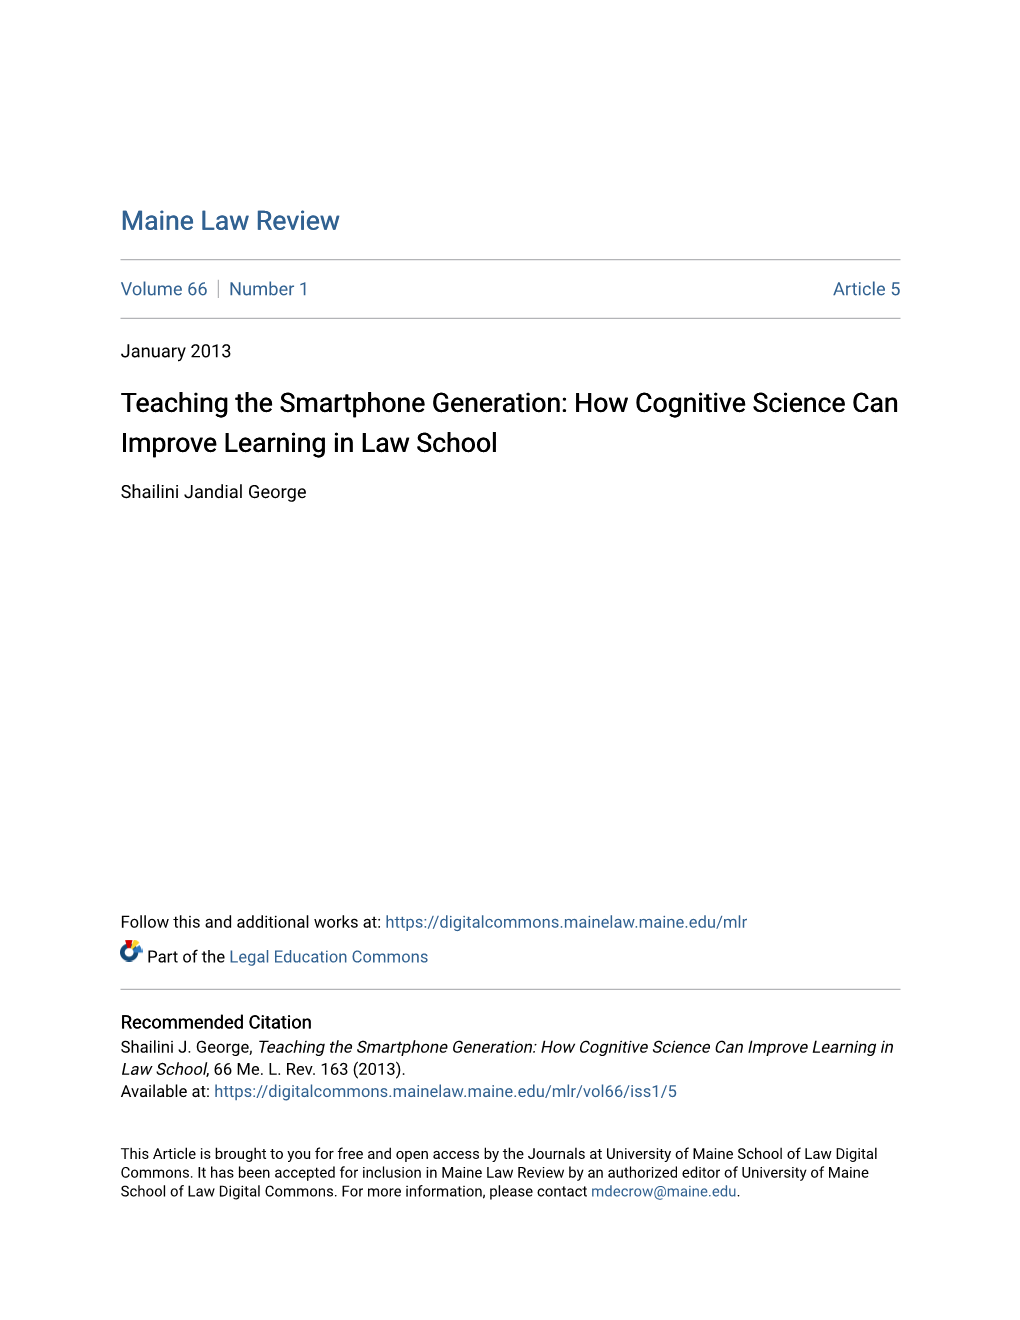 How Cognitive Science Can Improve Learning in Law School